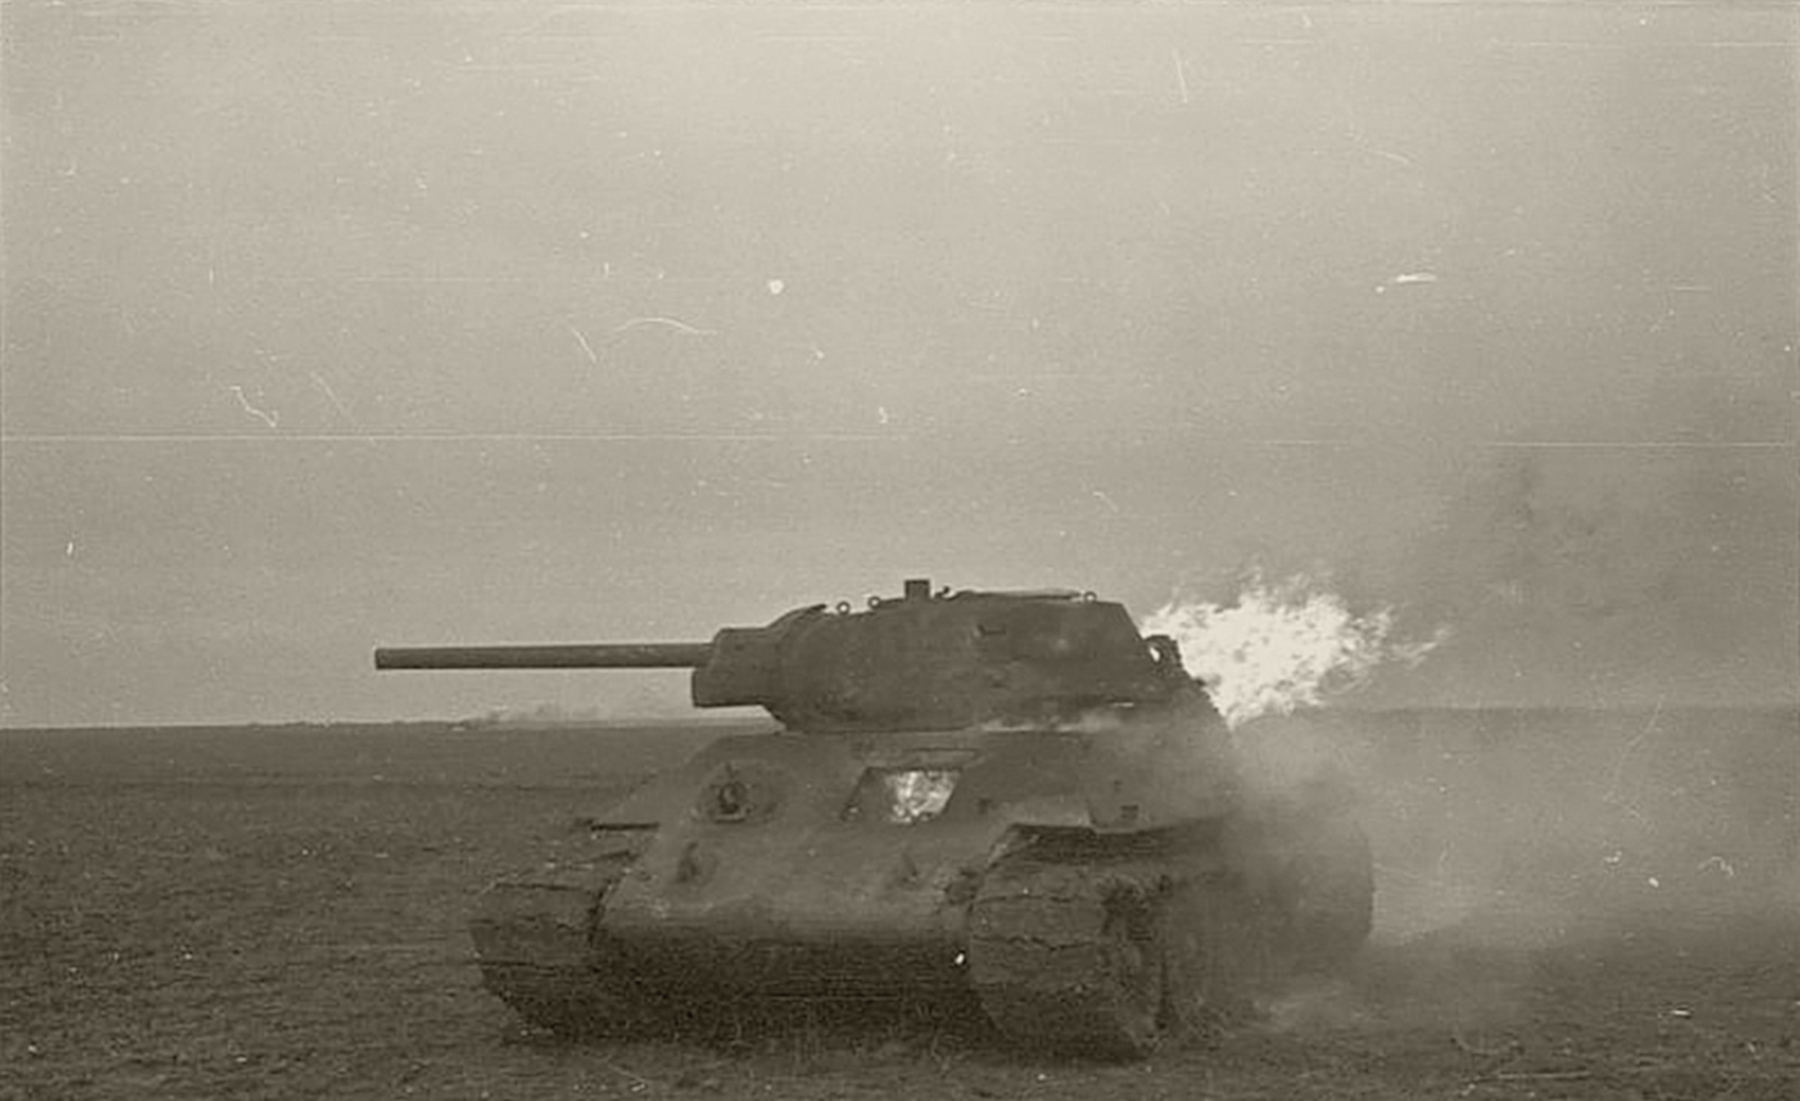 buried t 34 tanks during the battle of kursk